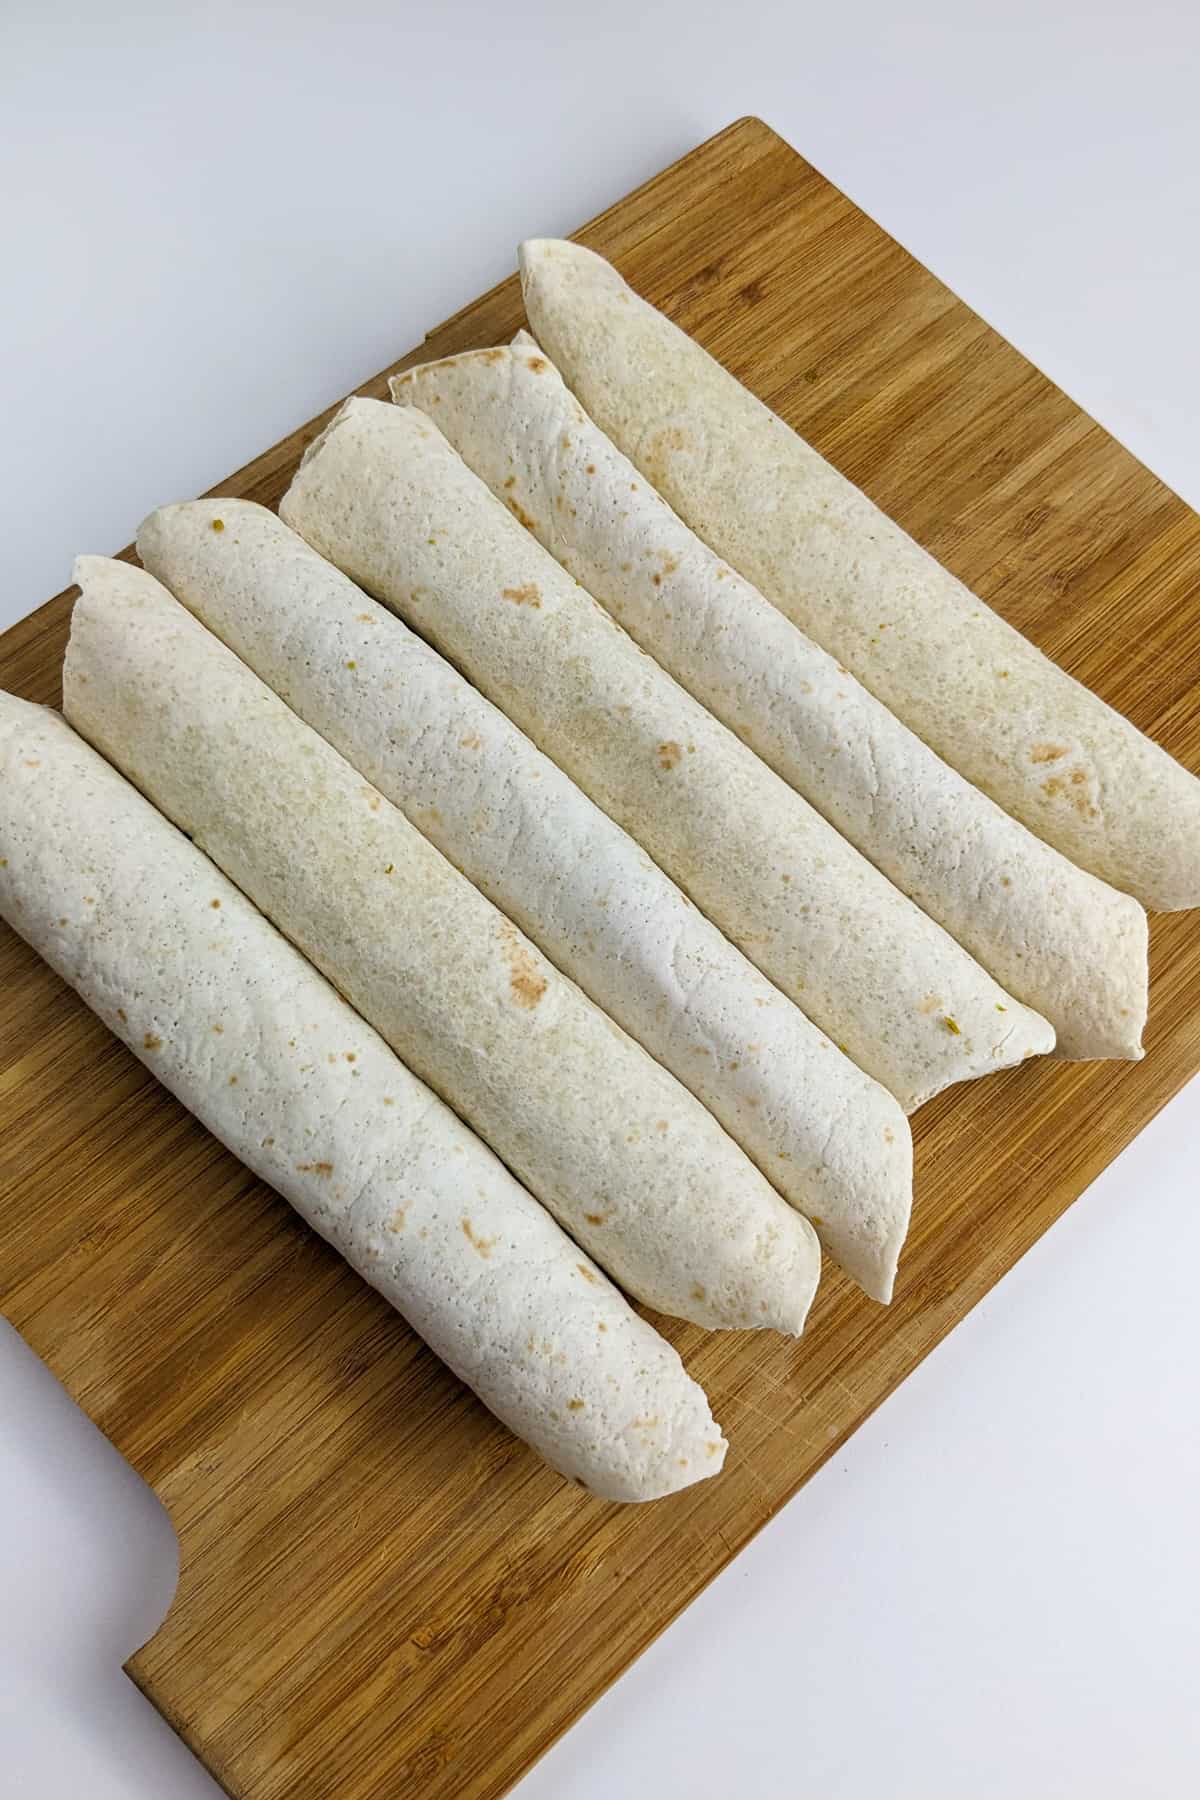 6 rounded crispitos with beef and cheese on a wooden cutting board.